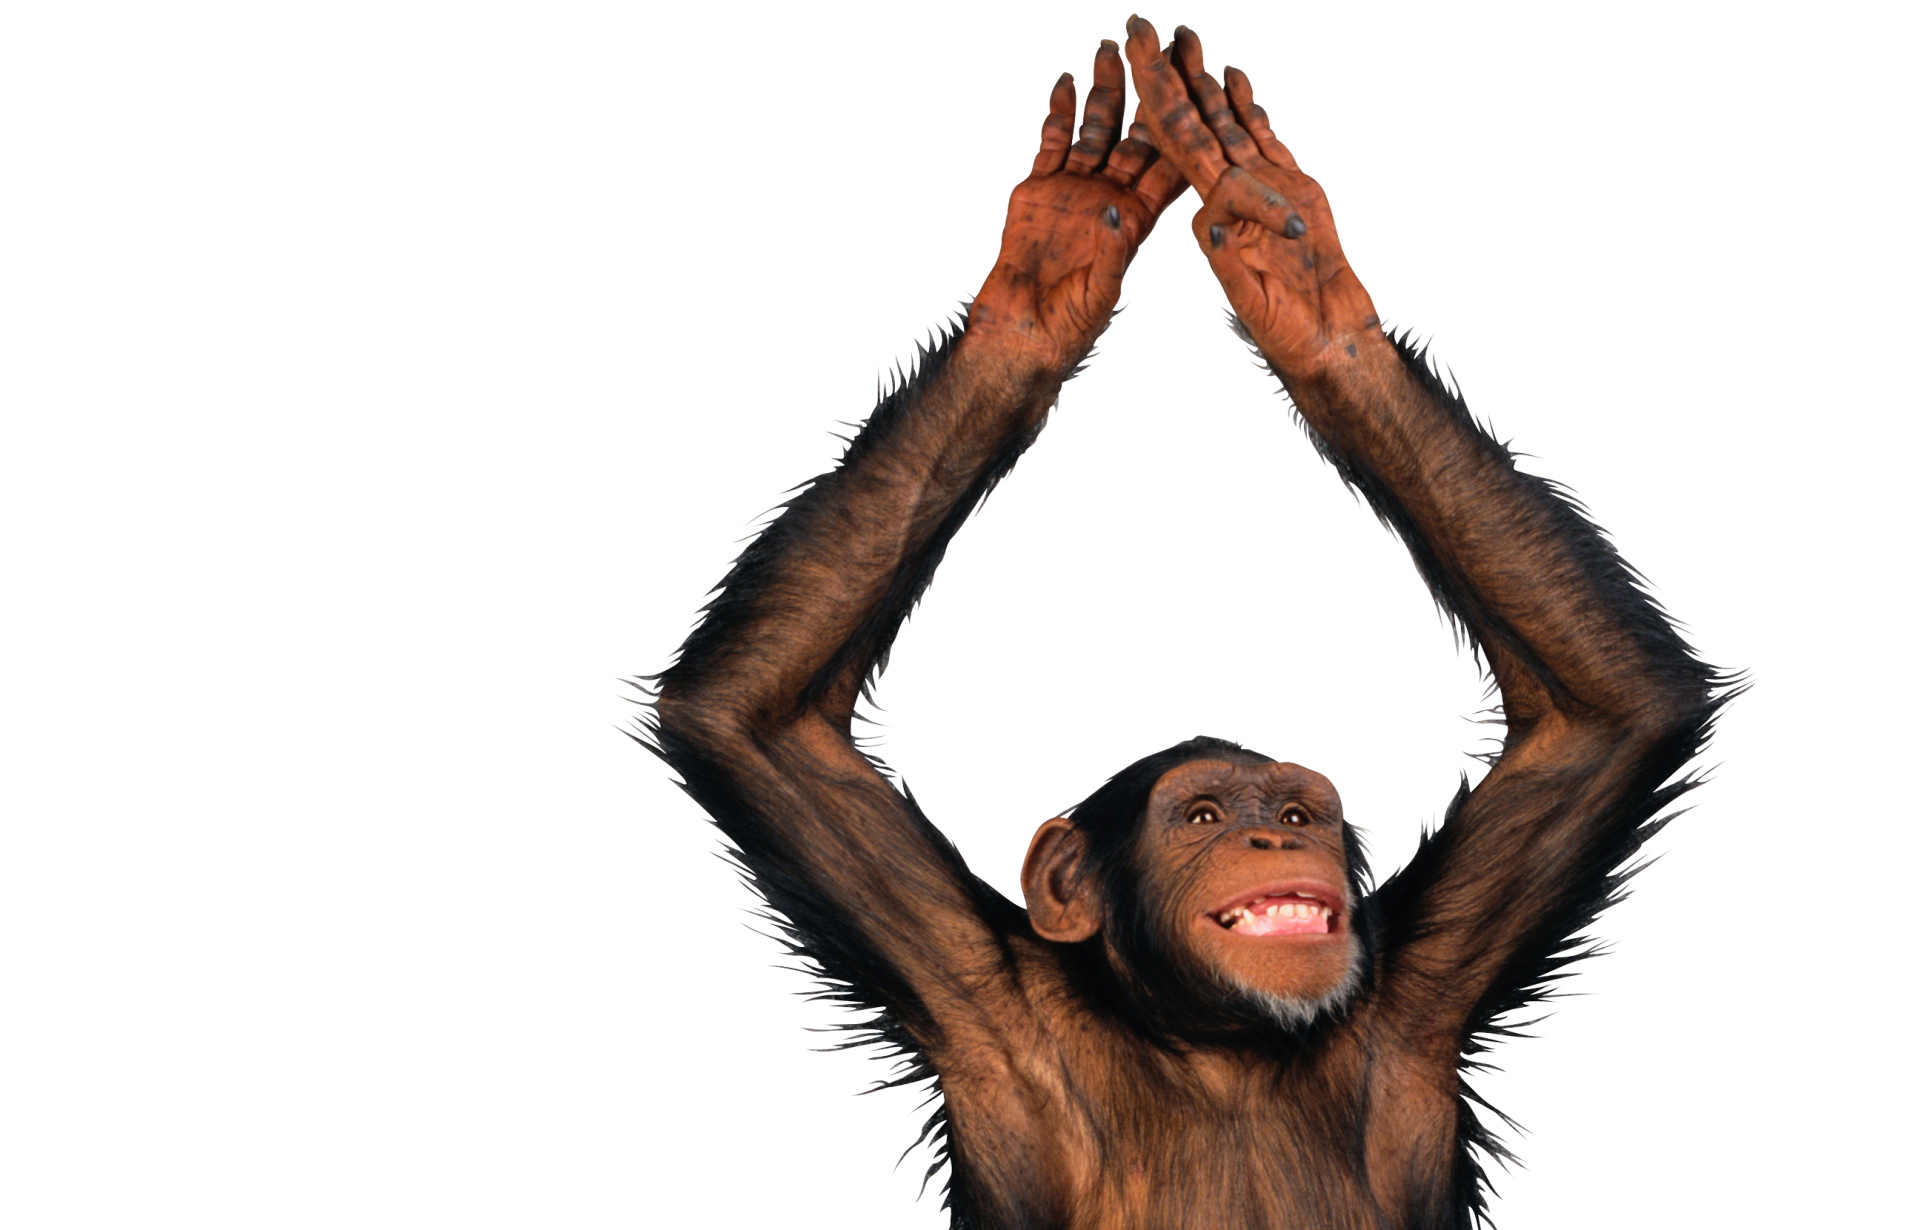 a chimpanzee is hanging upside down with its hands in the air .